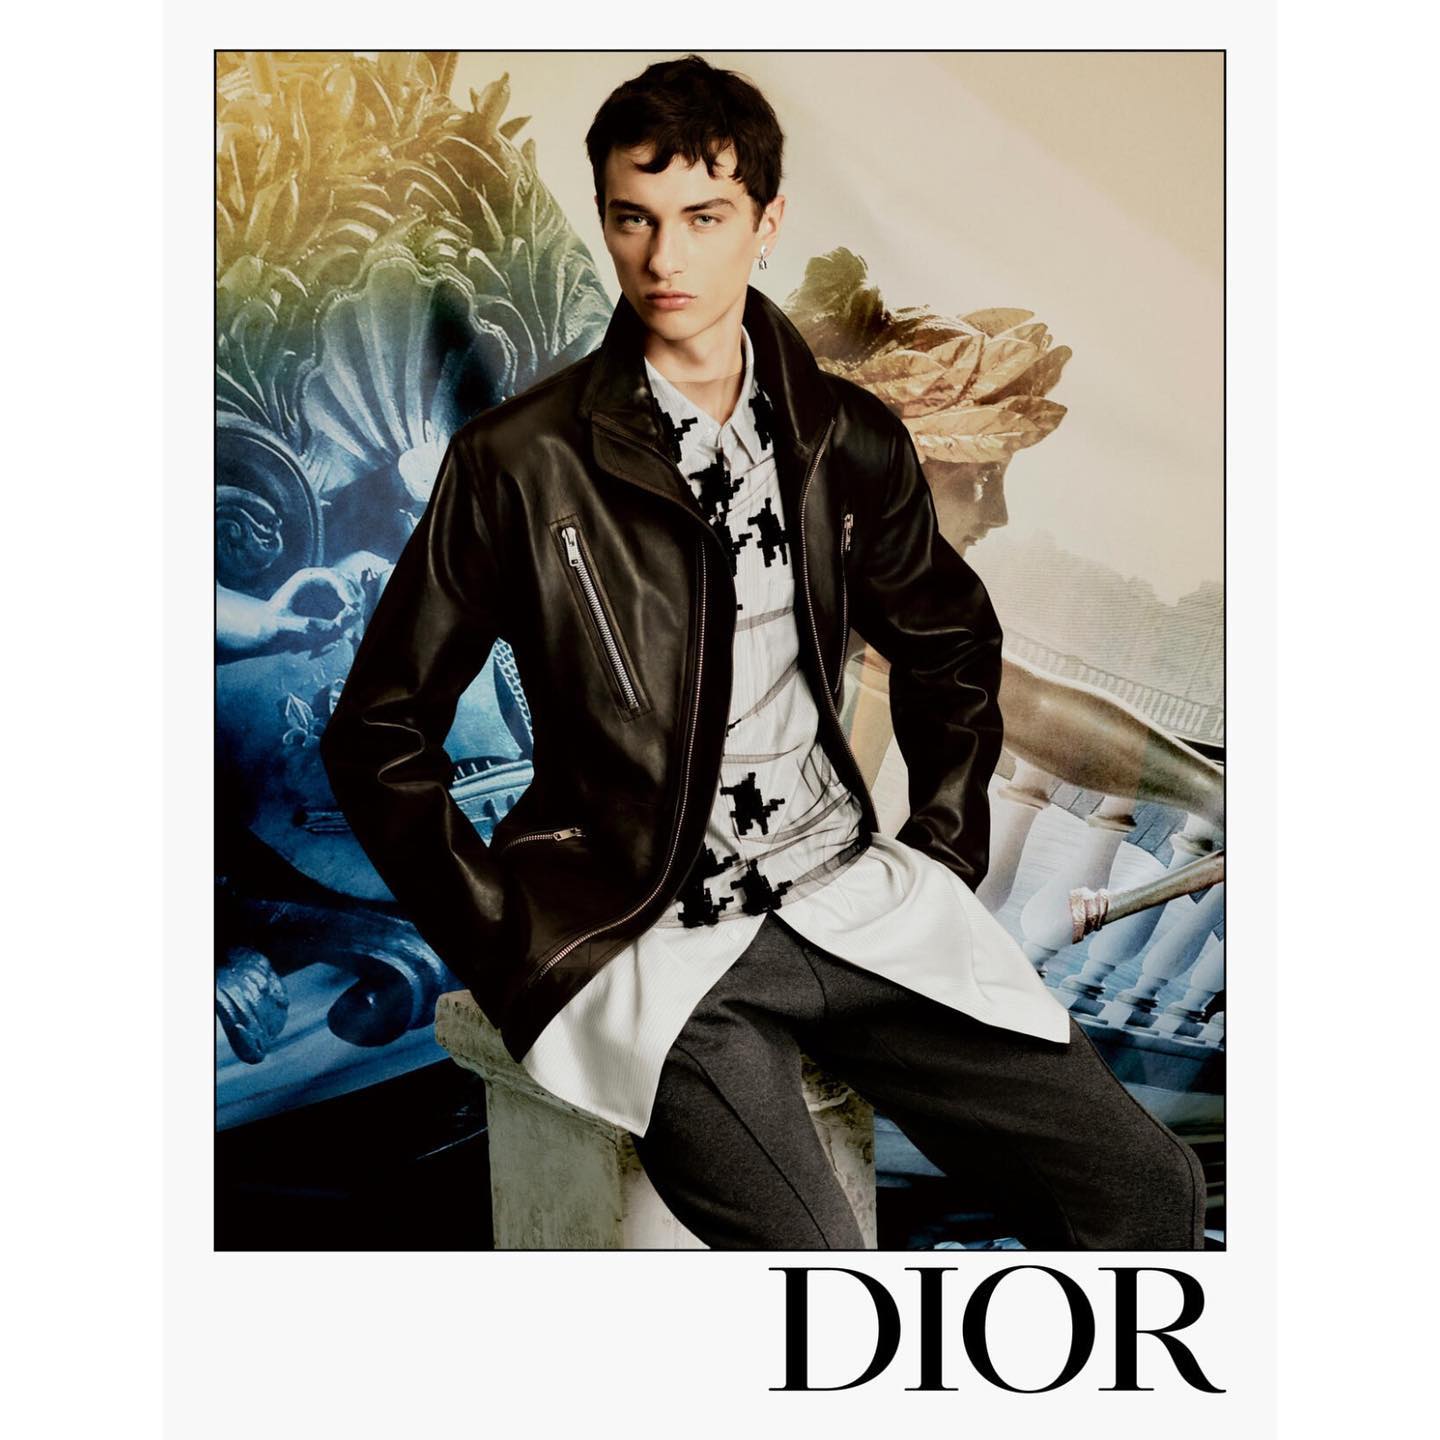 Viktor K (@viko63 ) for Dior Winter 22 Campaign. Photography by Rafael Pavarotti, styling by Melanie Ward, hair by Guido Palau, make up by Peter Philips, casting by Shelley Durkan.